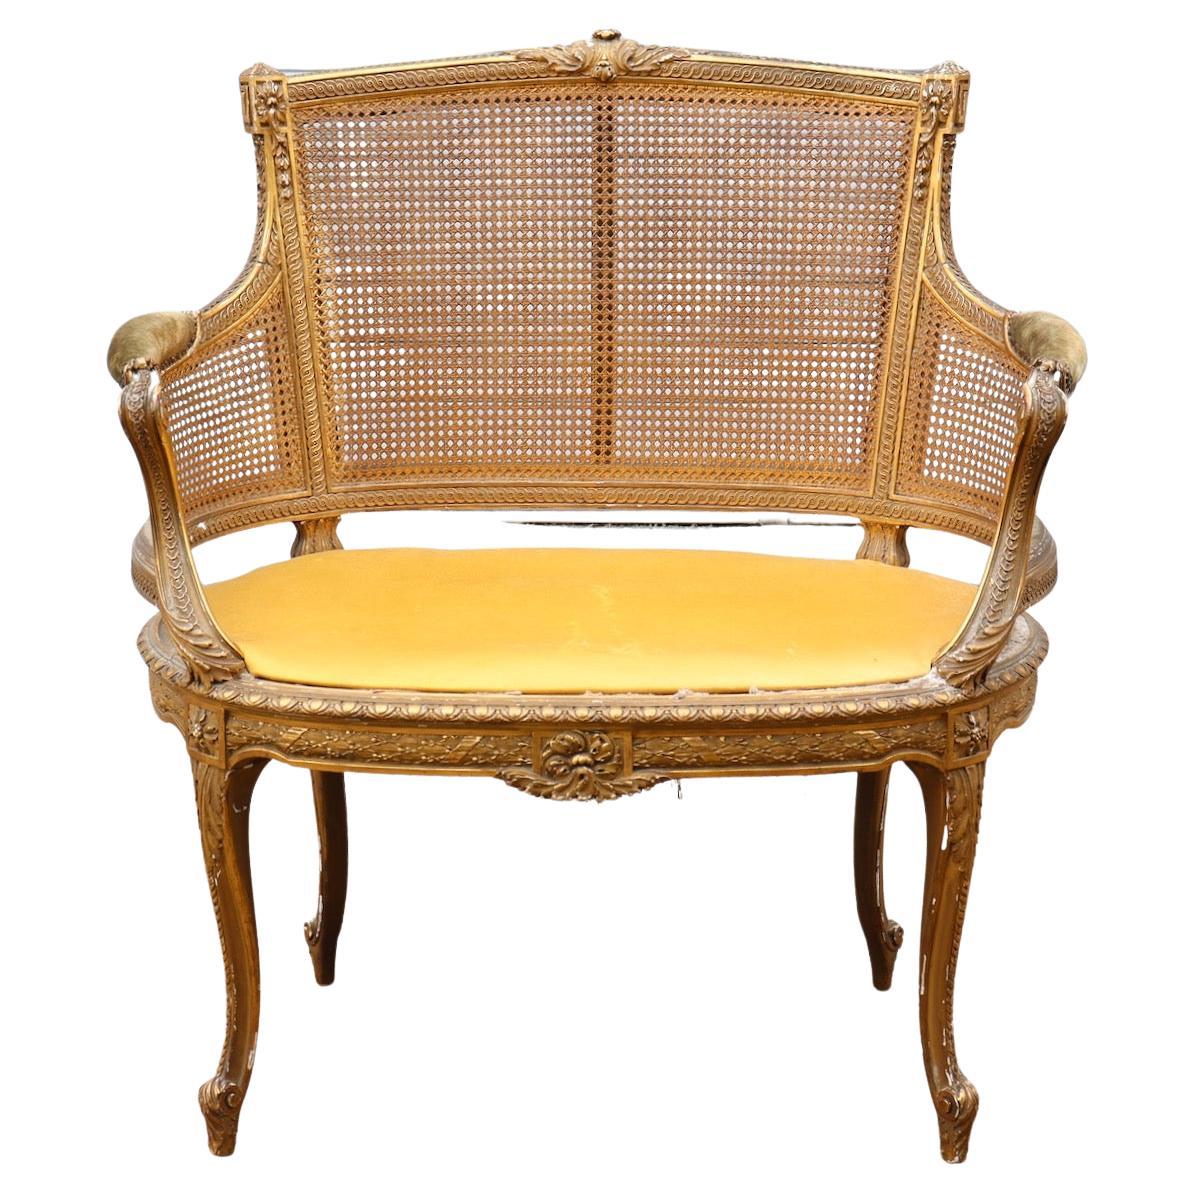 A very finely carved and gilded wood Napoléon III Marquise en Corbeille 
Hand-carved with friezes of ova, acanthus leaves, rosettes and garlands of laurels
Transition Style 
With good conditions caned backrest and seat (drilled), replaced by a